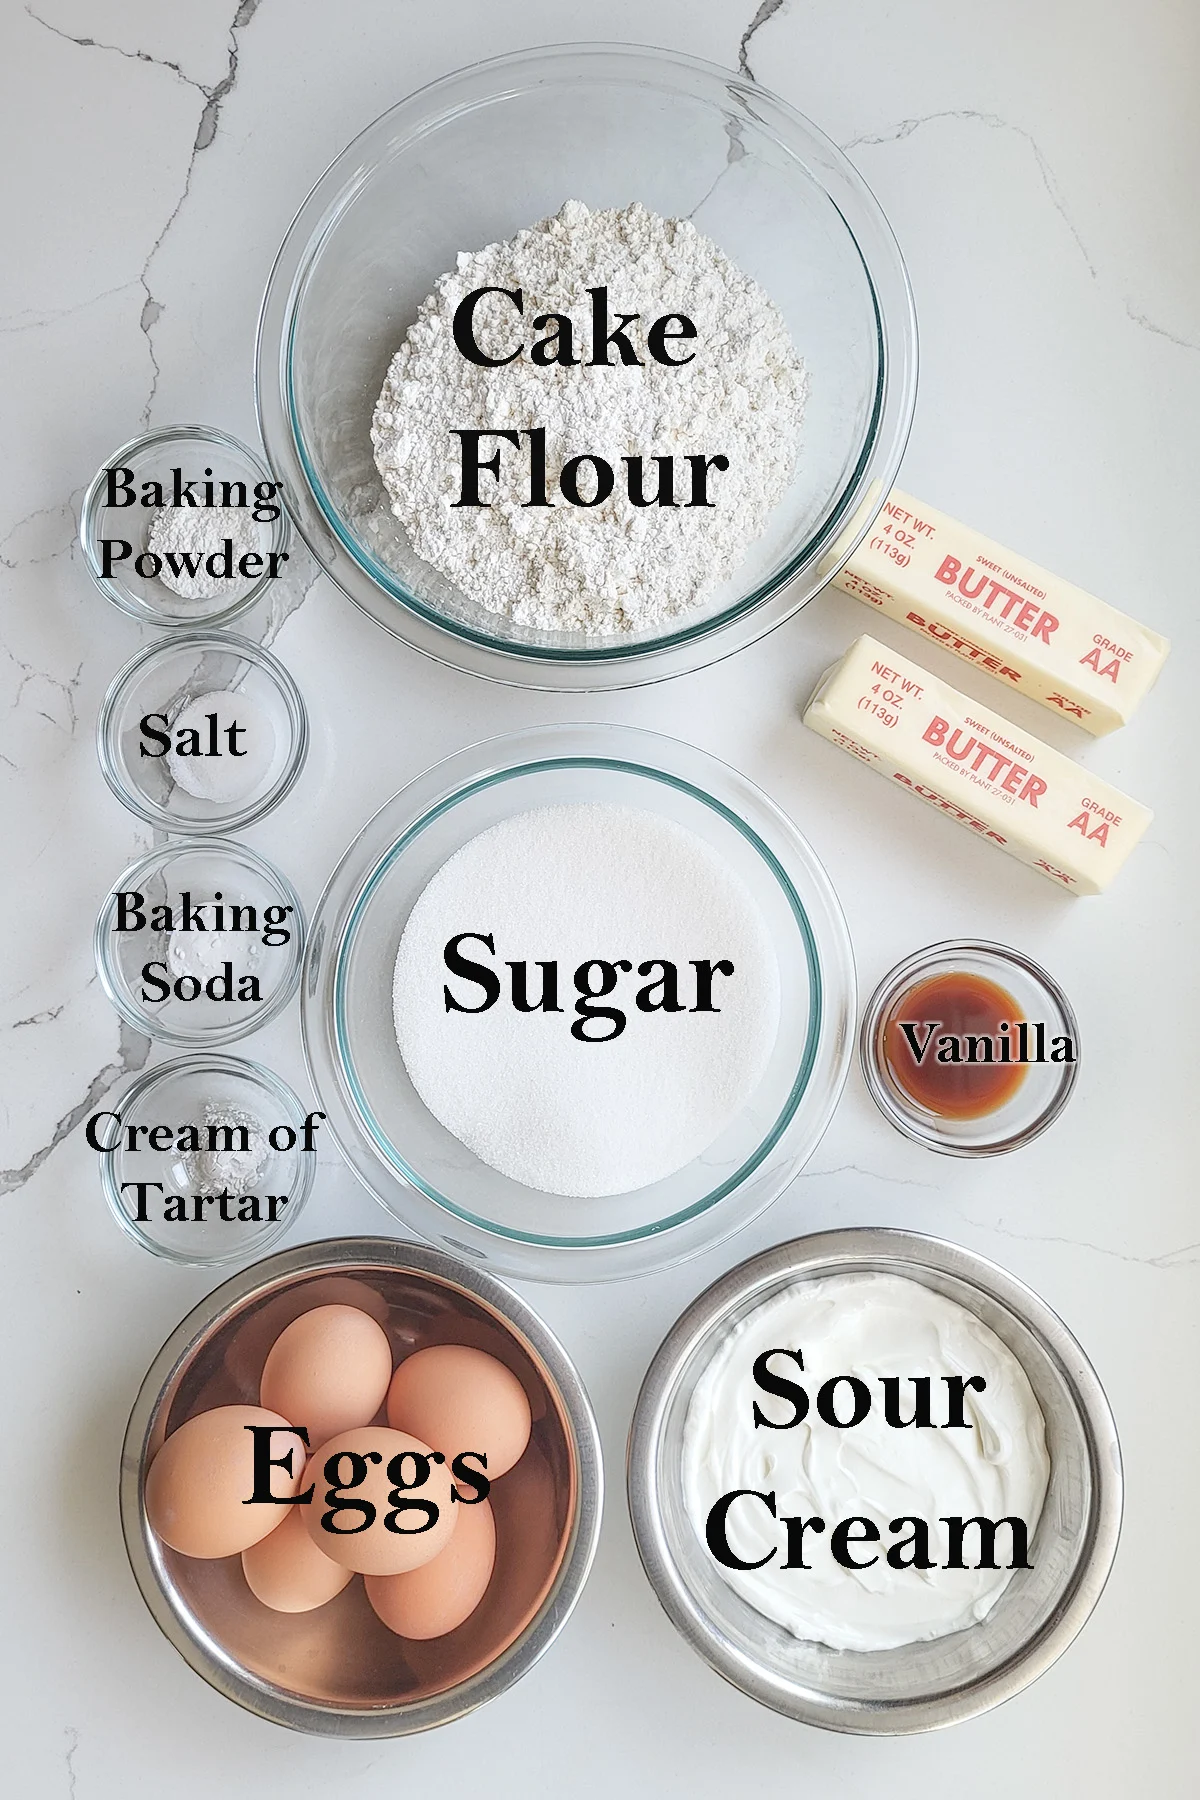 Vanilla cake ingredients in bowls with text overlay on the photo identifying the ingredients.